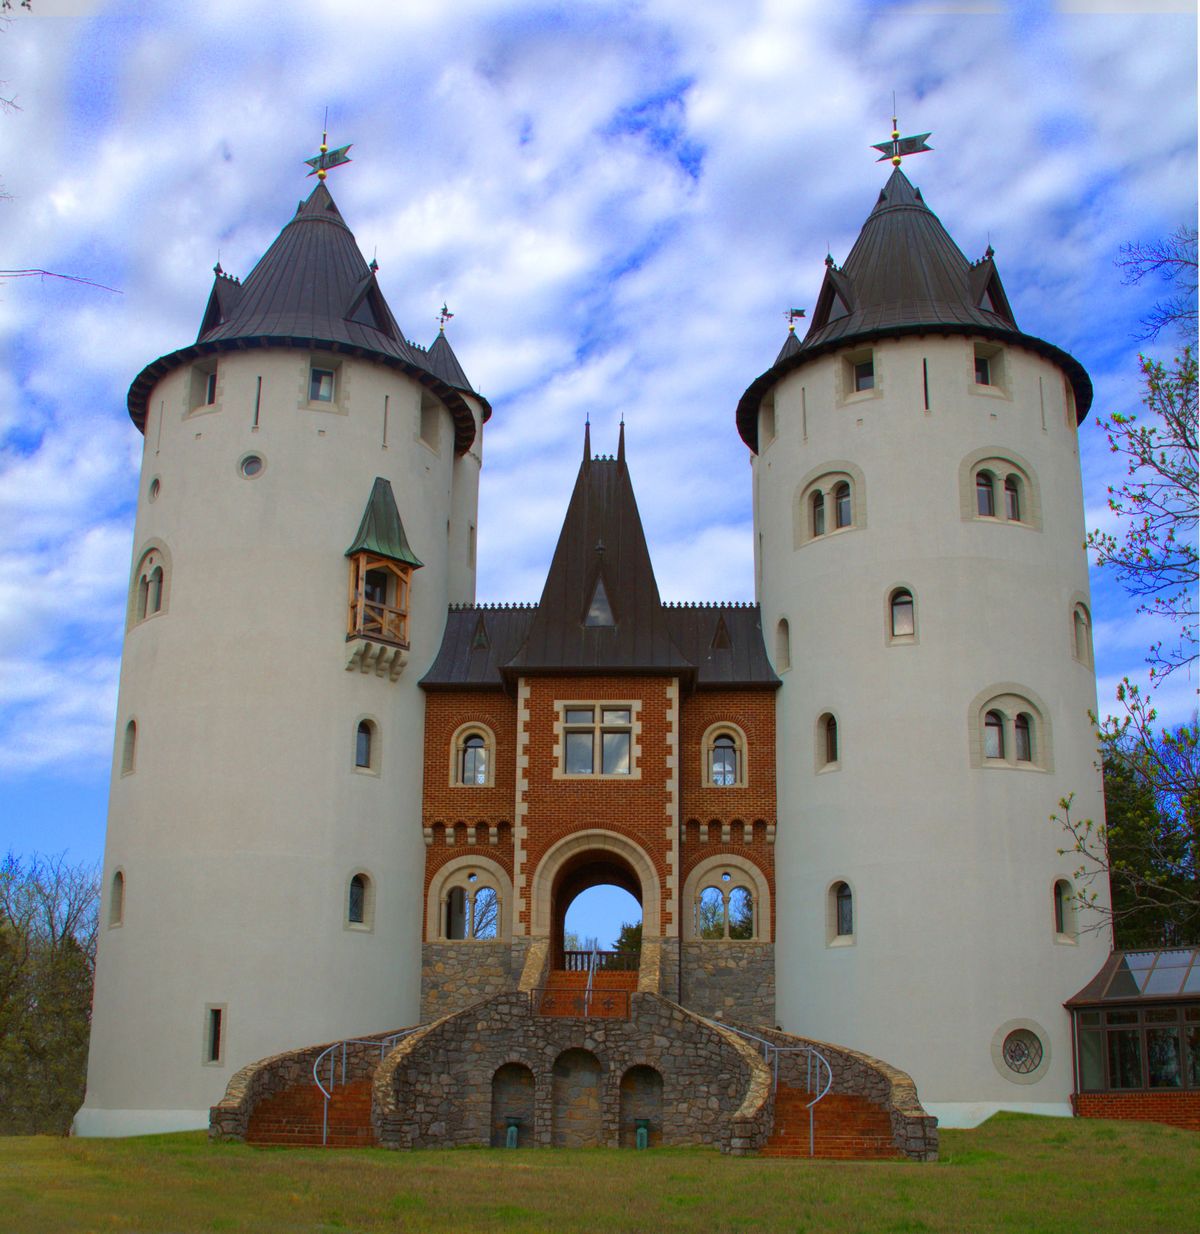 castle gwynn, the sole filming location for taylor swift's "love story" music video, and the site of the tennessee renaissance festival